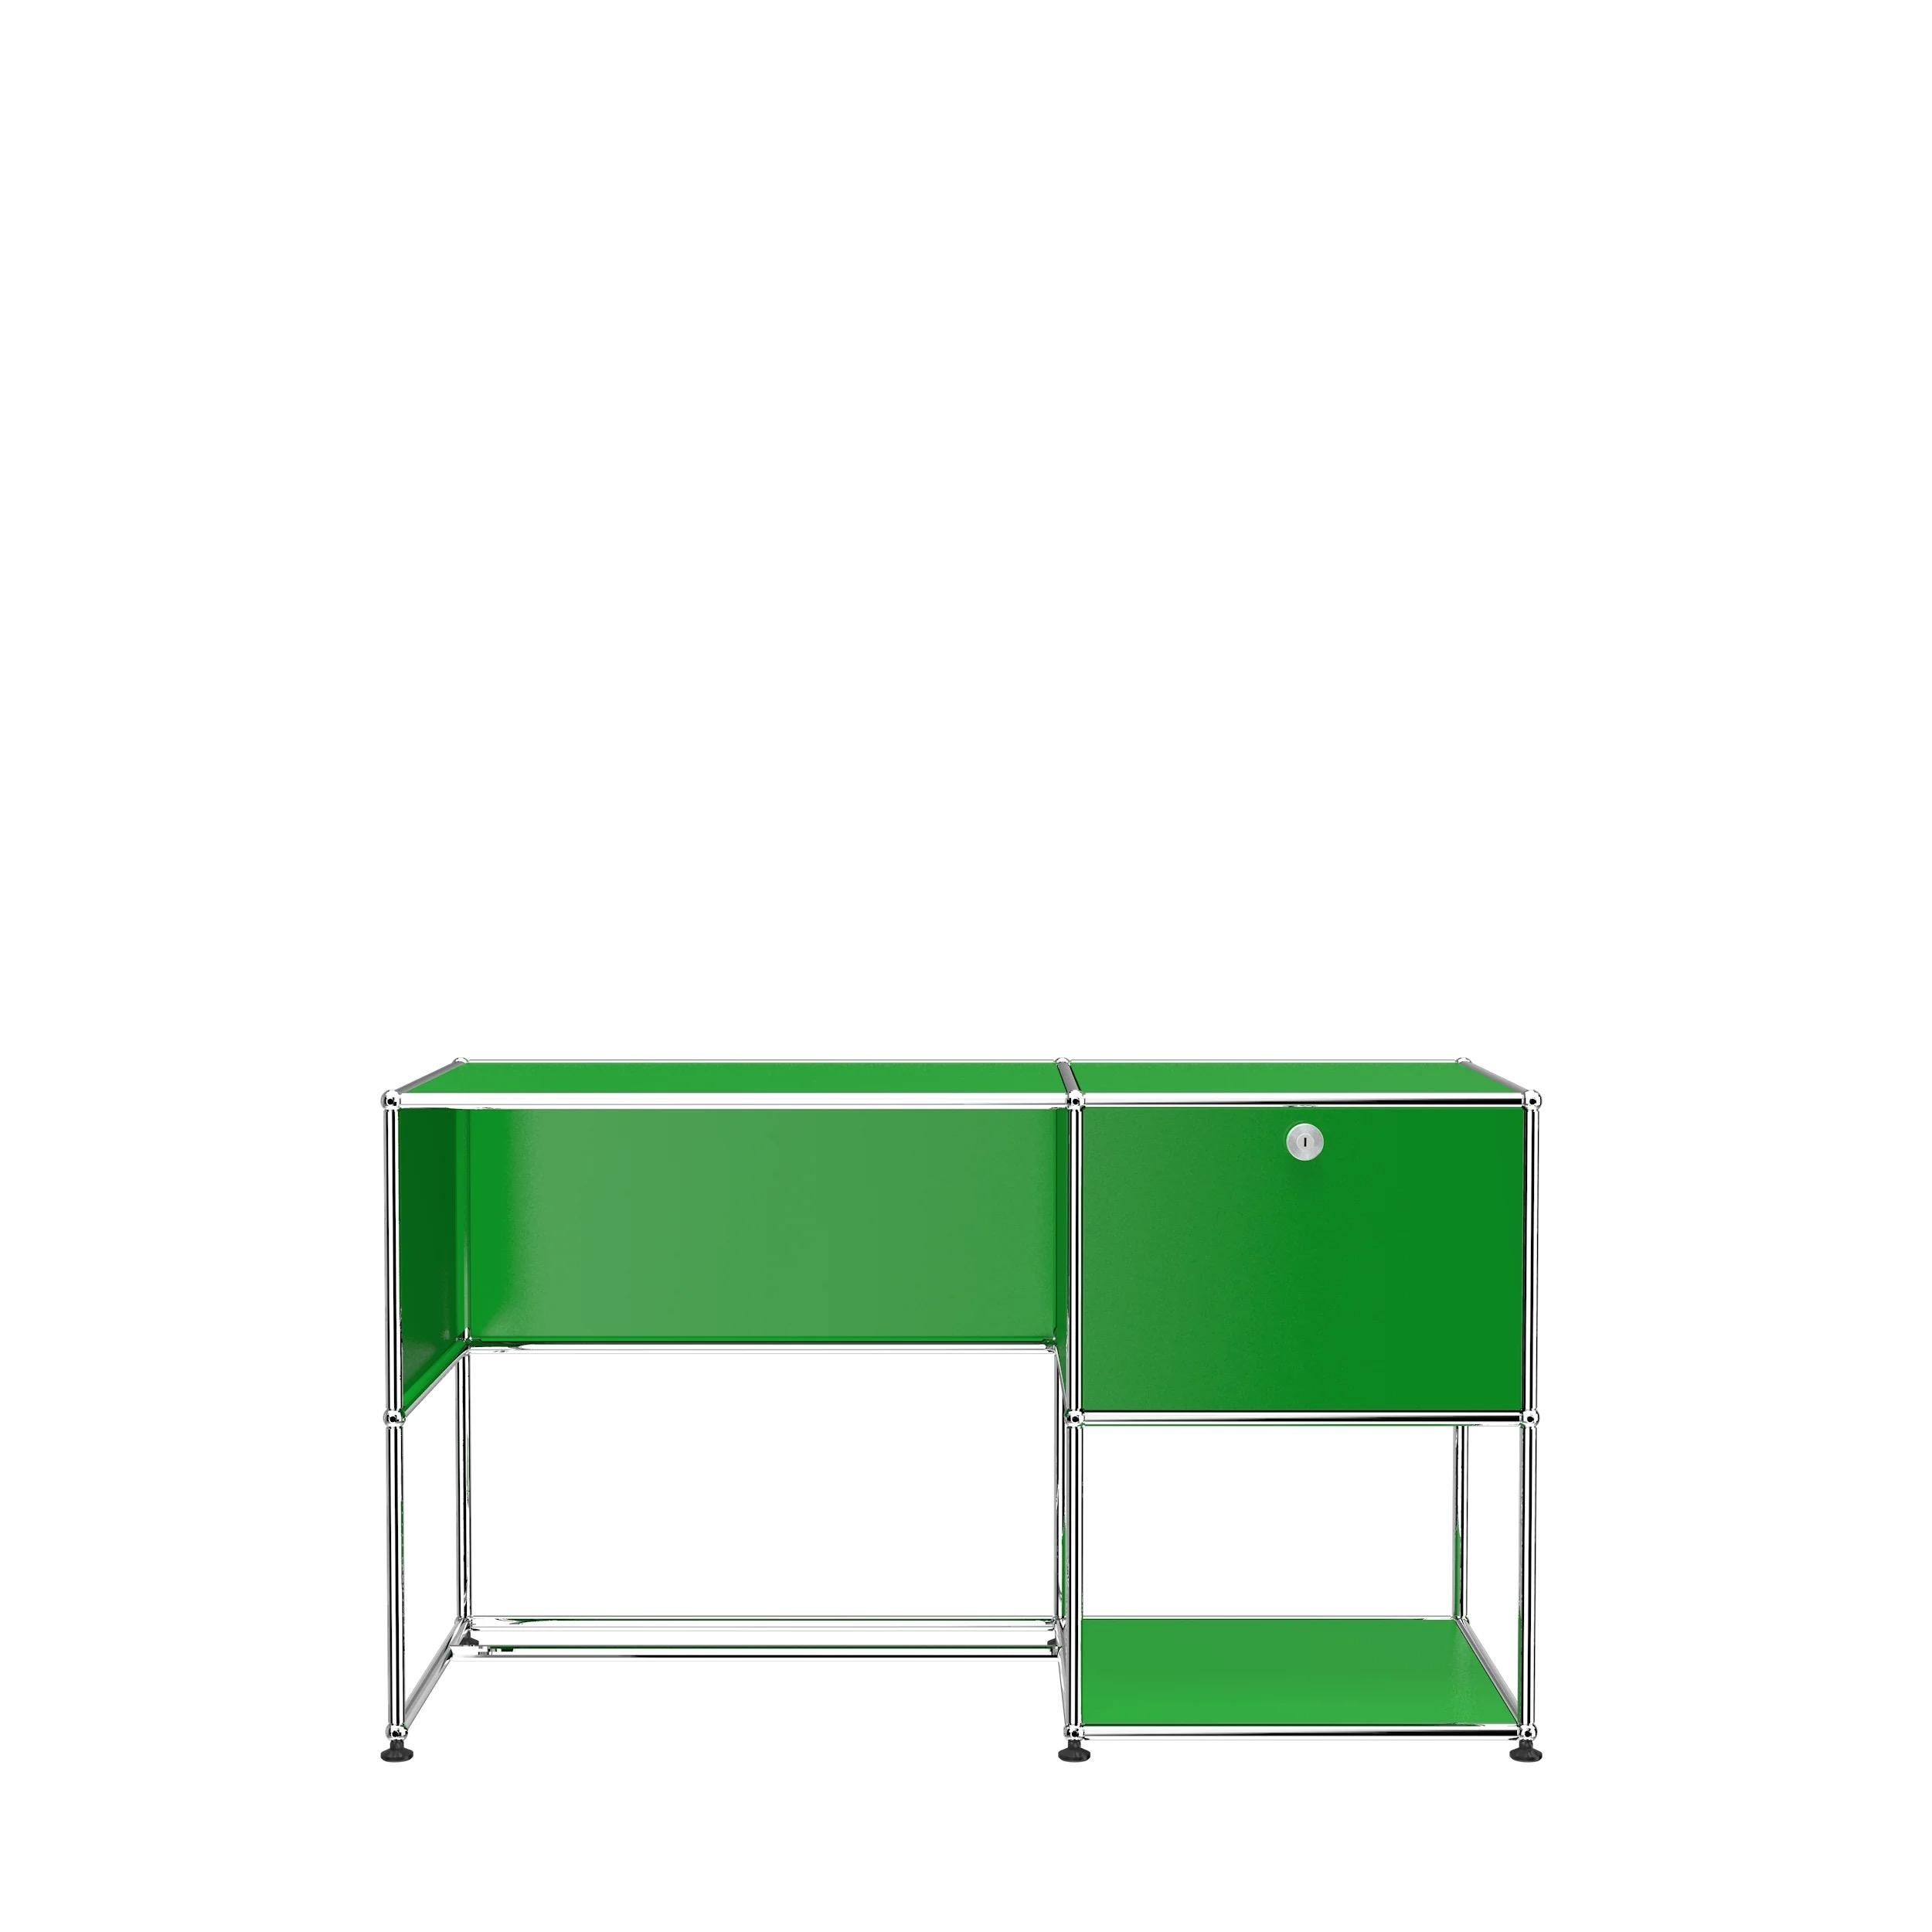 USM Haller Custom Desk Unit 'A' Designed by Fritz Haller and Paul Schaerer In New Condition For Sale In New York, NY